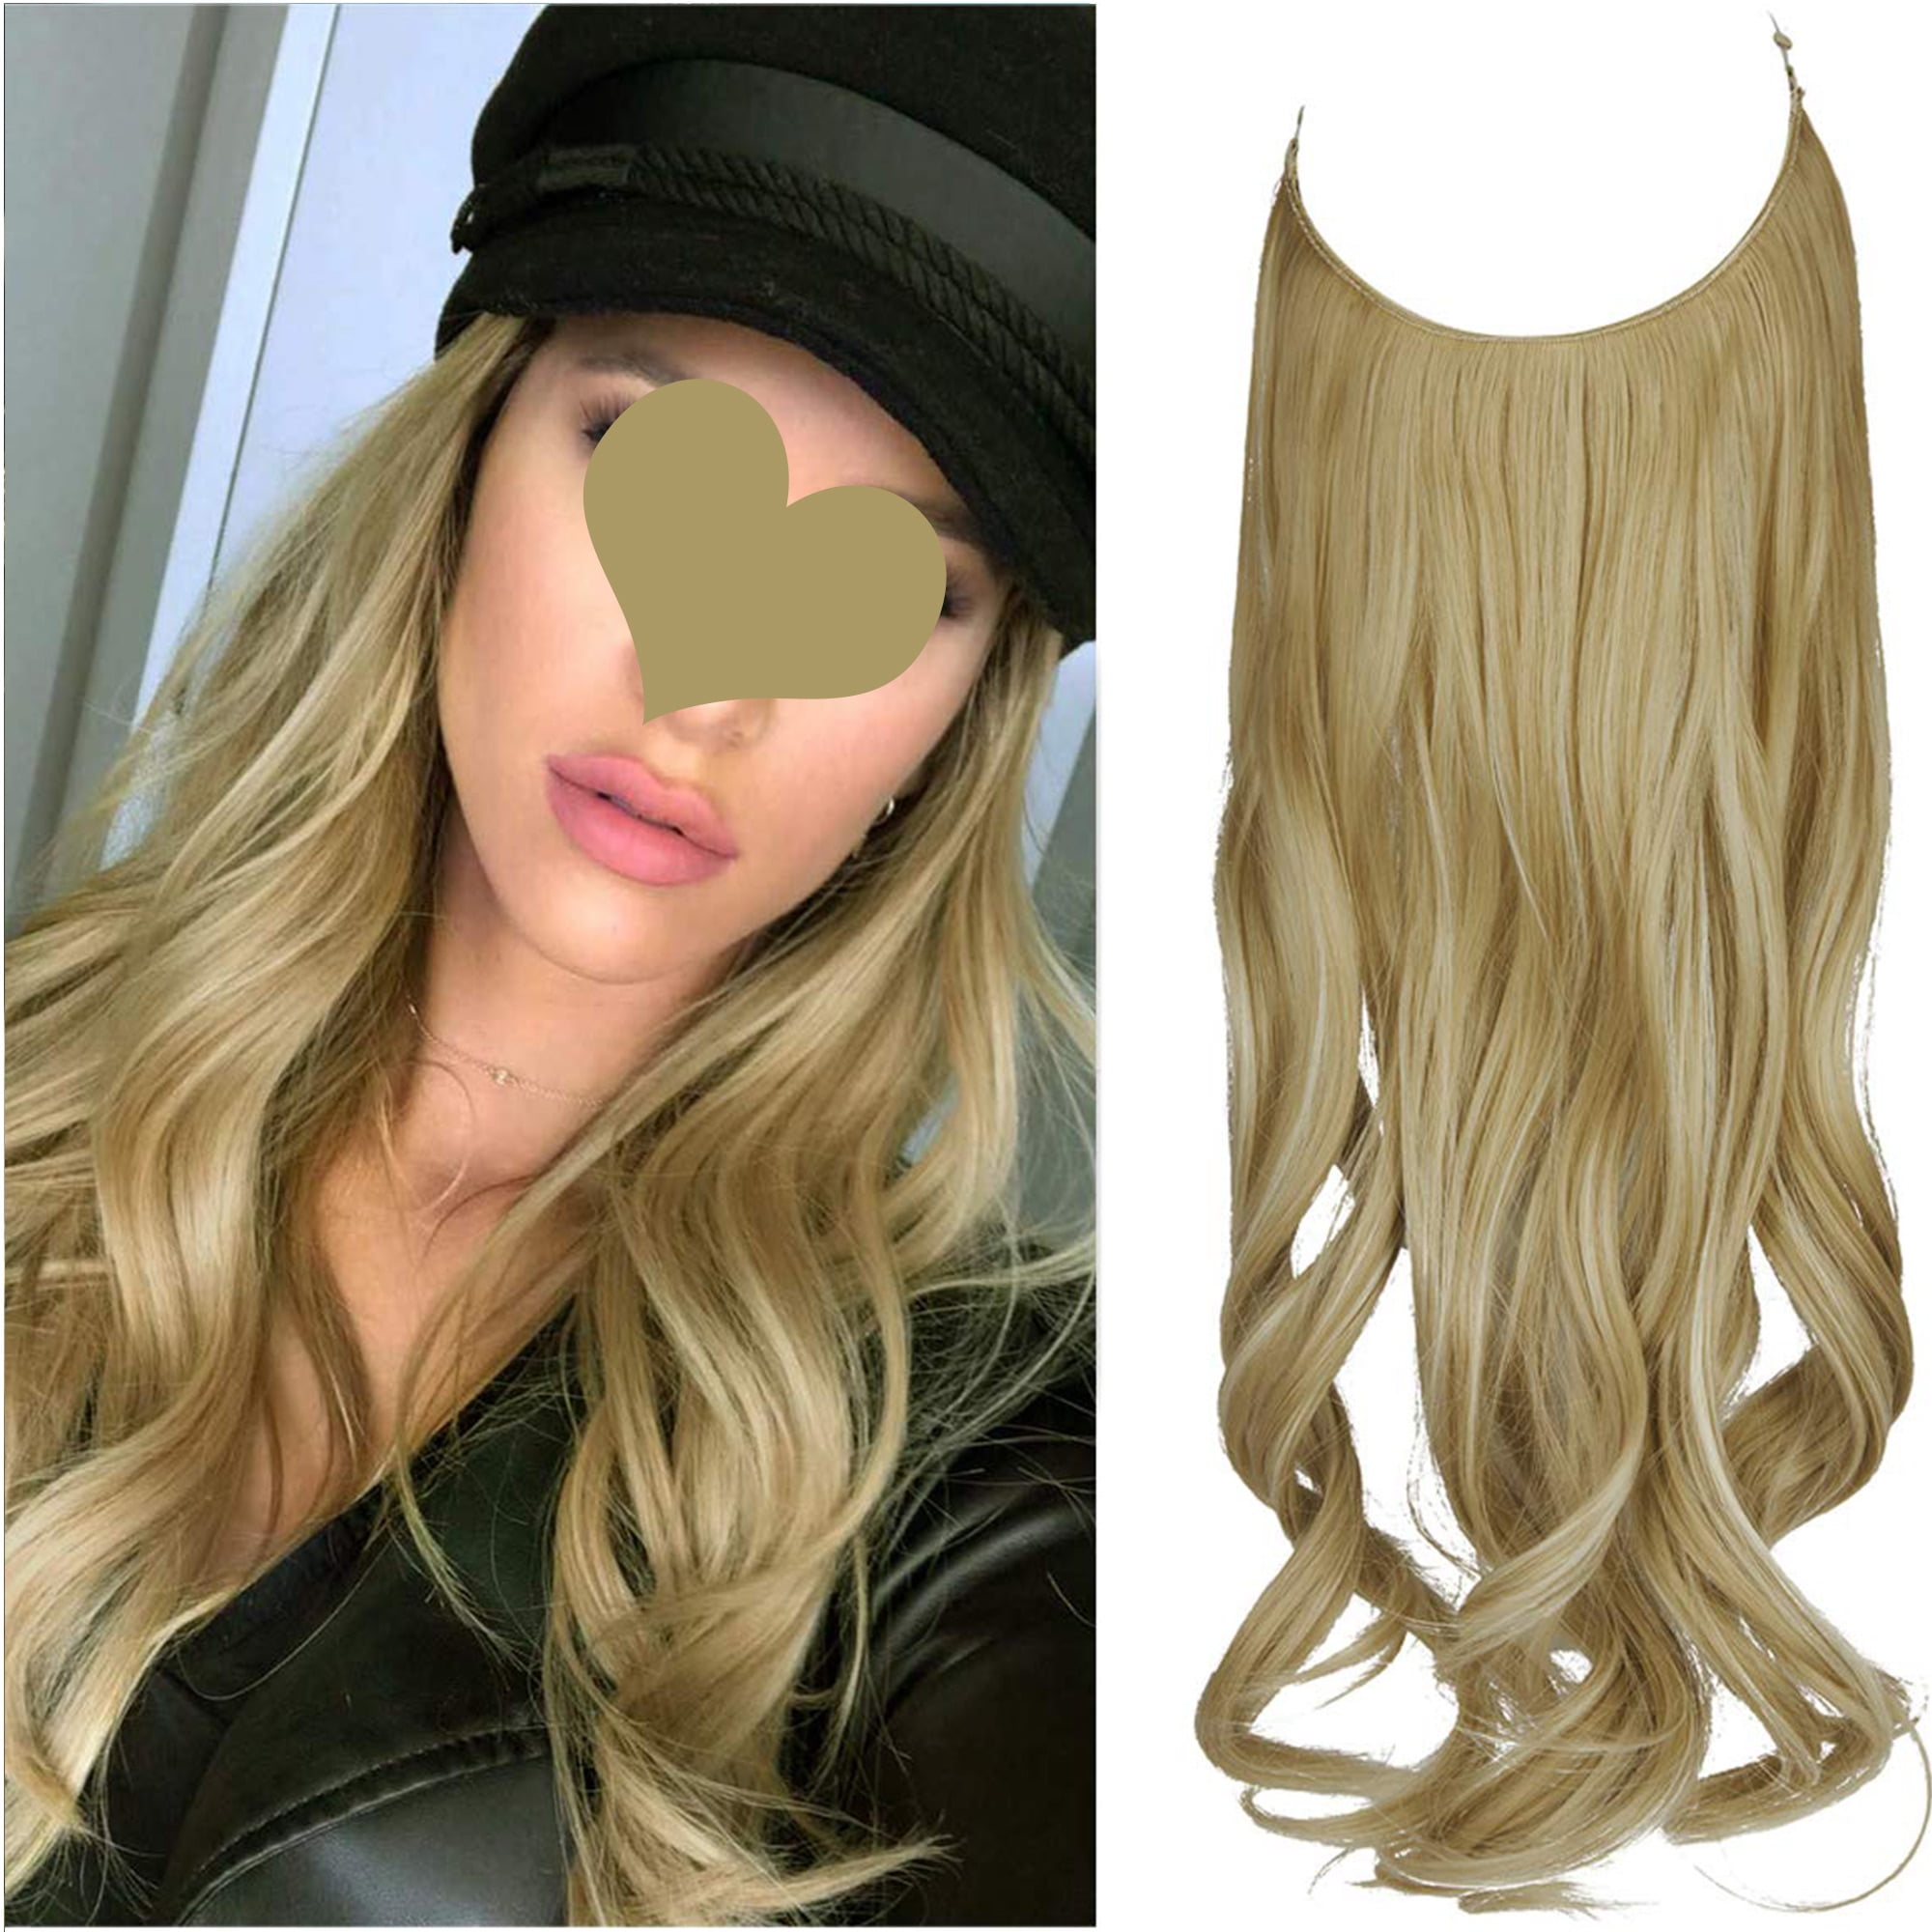 Hairpiece Hair Extensions with Invisible Transparent Wire Adjustable Size  Removable Secure Clips in Curly Wavy Hidden Secret Hairpiece for Women 20  Inch  Oz -Black Brown Blonde 